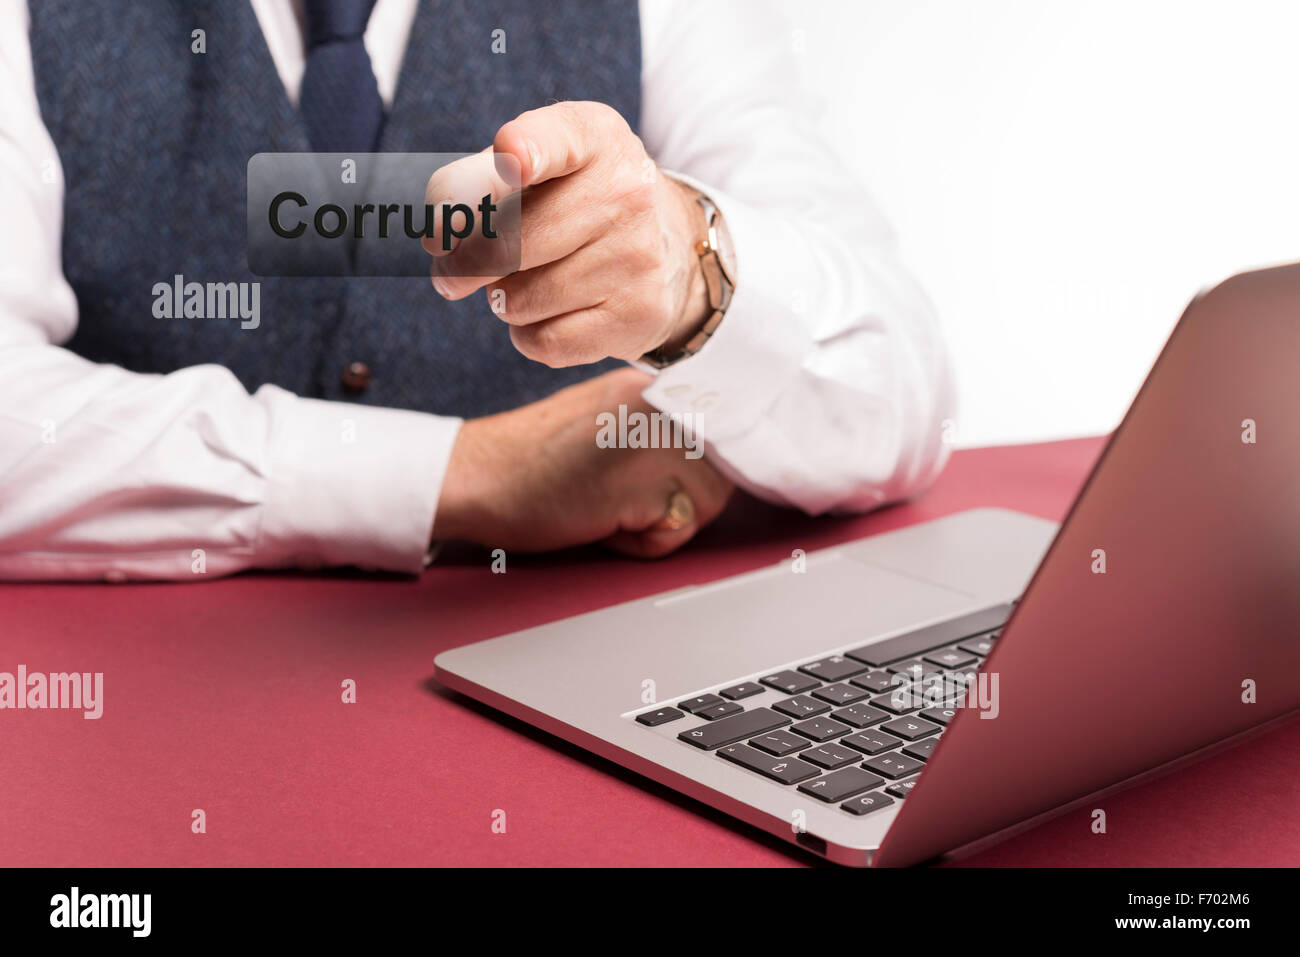 Smartly dressed businessman sitting at office desk with laptop in view pointing at the word corrupt on a clear screen Stock Photo